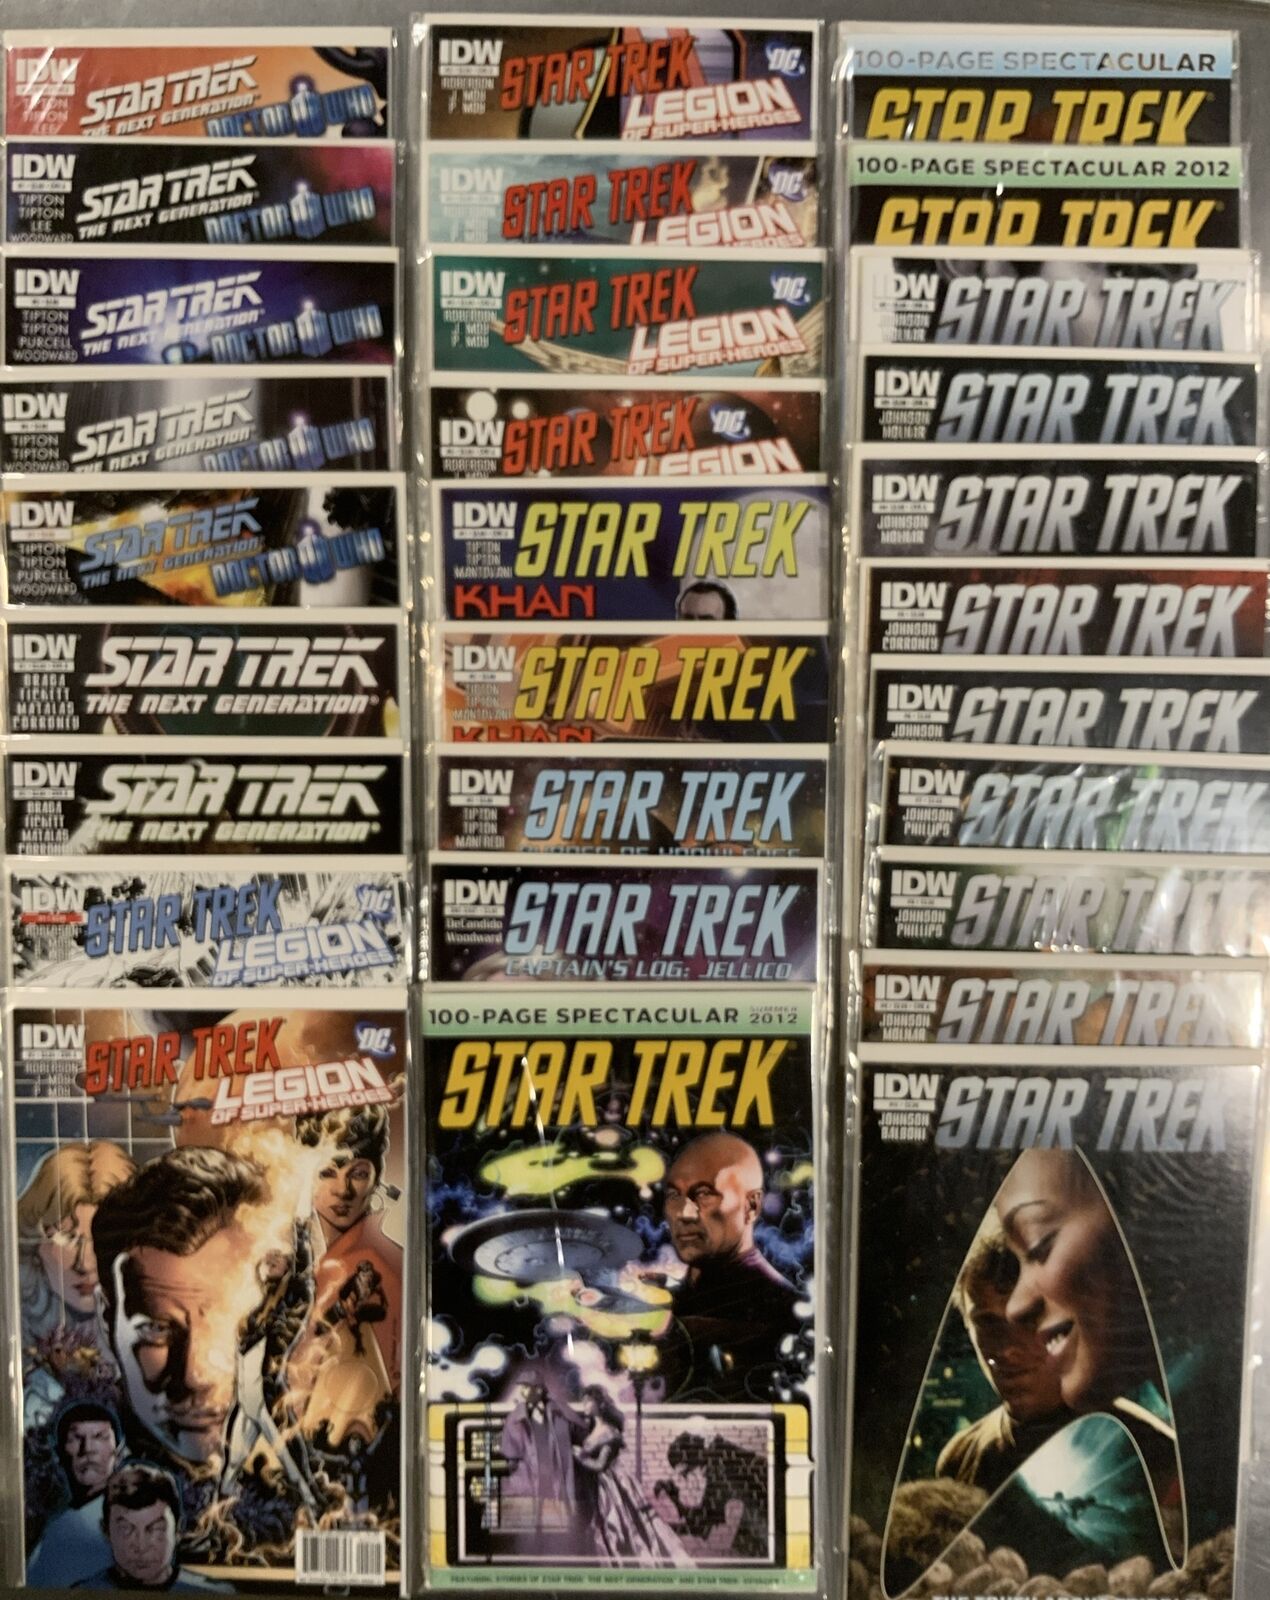 Star Trek IDW Comic Lot 33 books VF/NM Doctor Who Legion and more 